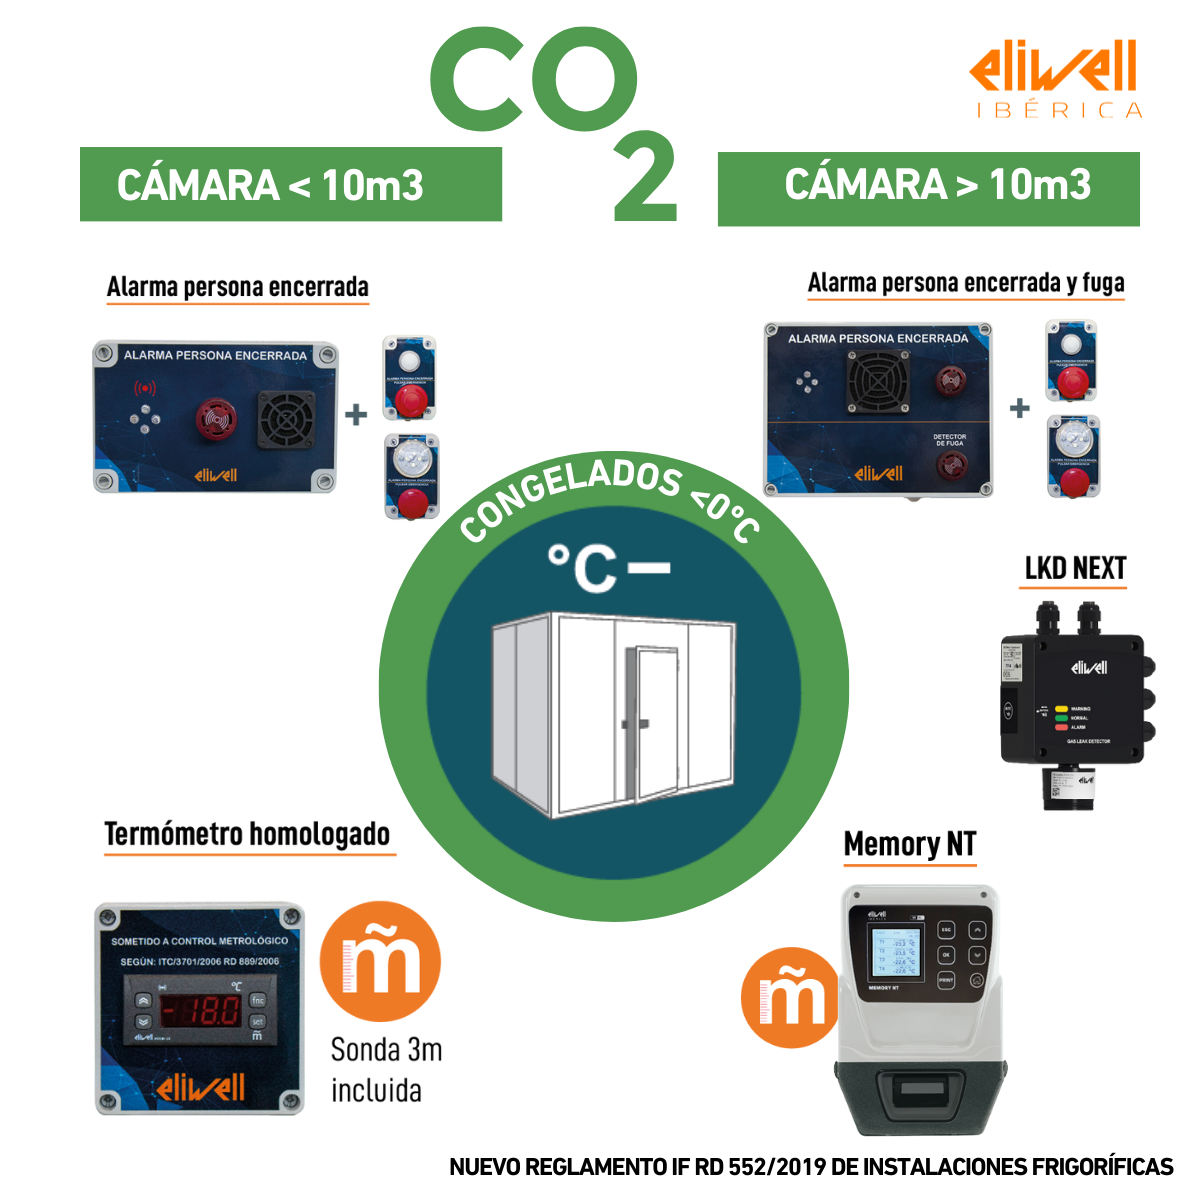 Photo with the alarm and signaling systems required by the regulations for frozen cold storage with CO2